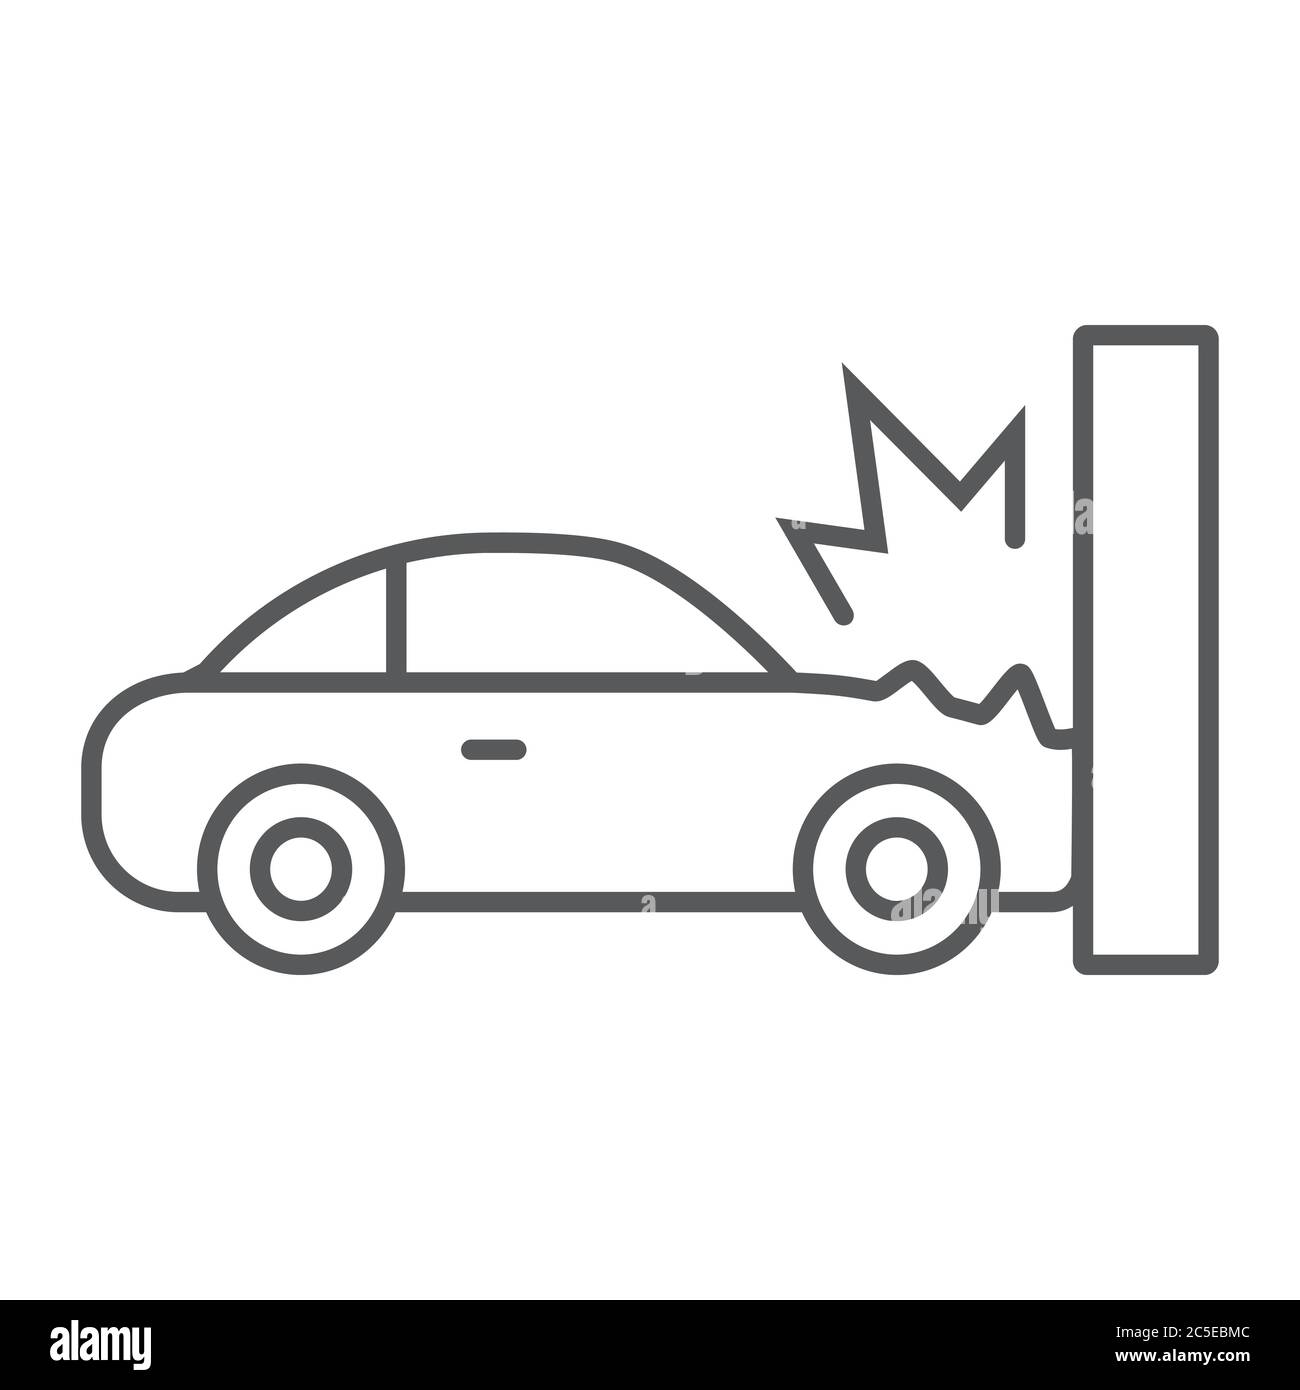 Overturned car or collision of cars pictogram. Cartoon car crash, accident  symbol or icon. Road, traffic accident. Crashed cars or service logo. -  SuperStock